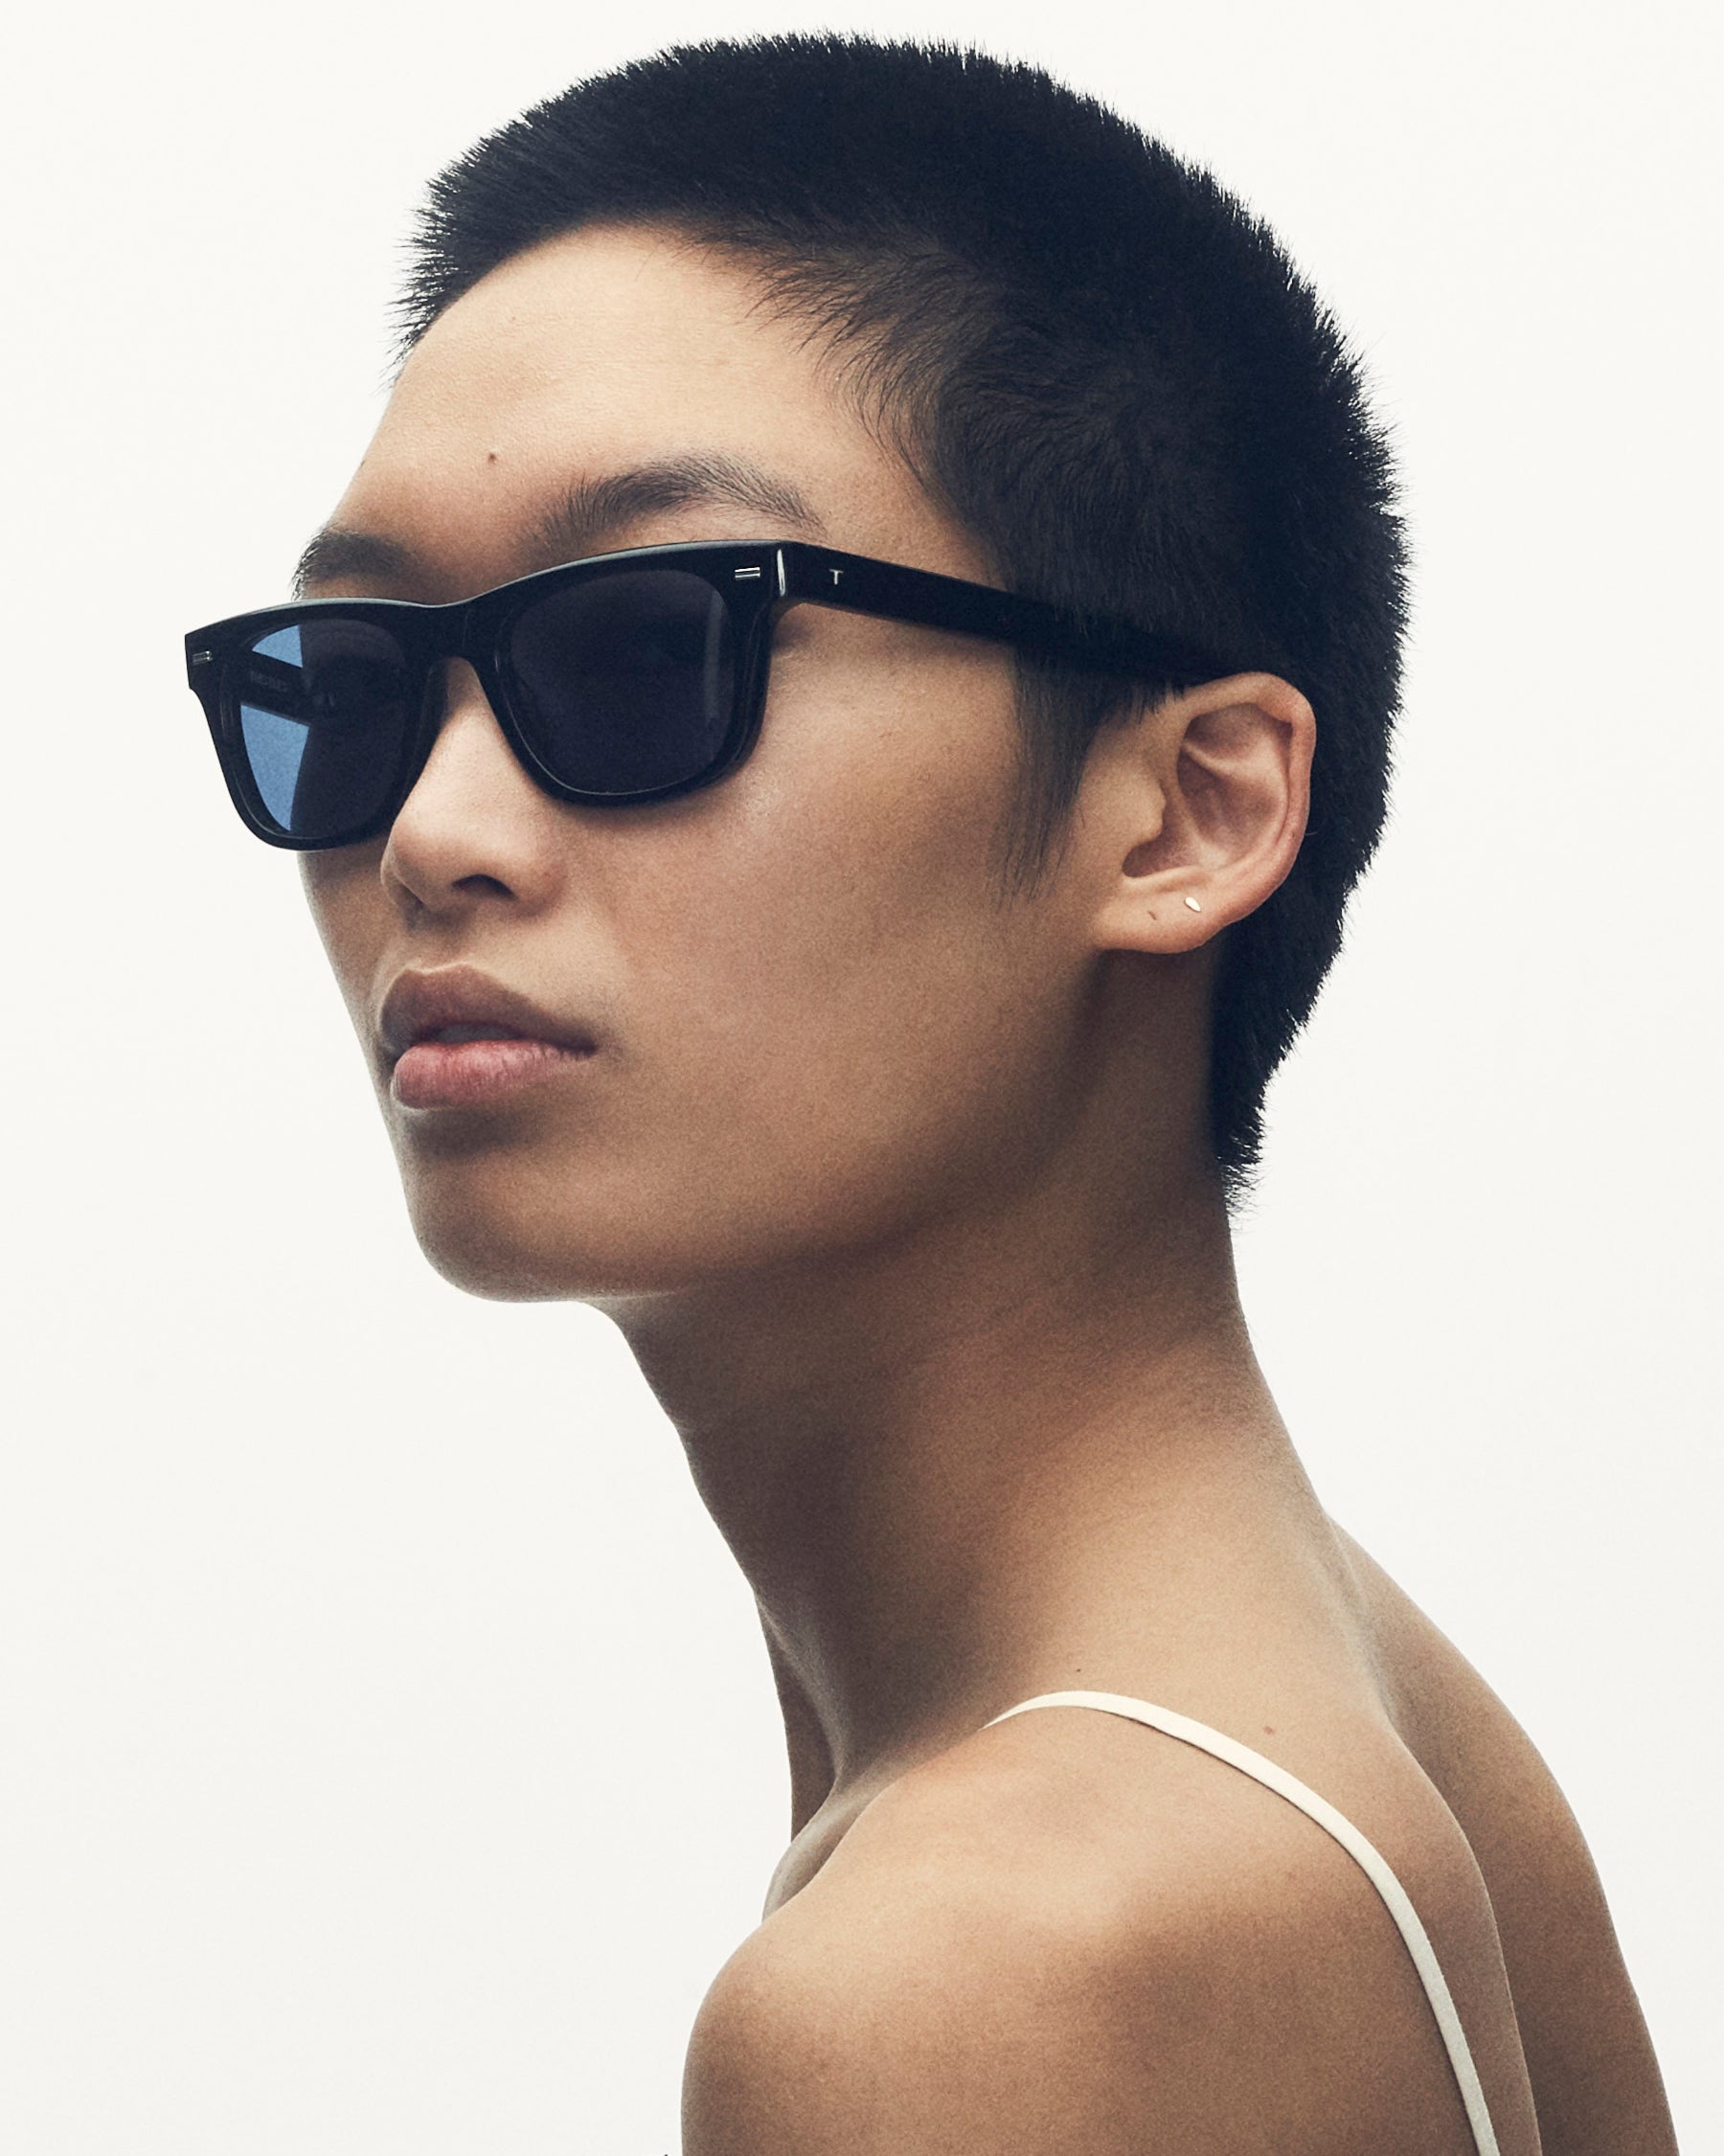 model wearing sunglasses. she is looking over her shoulder at the camera.